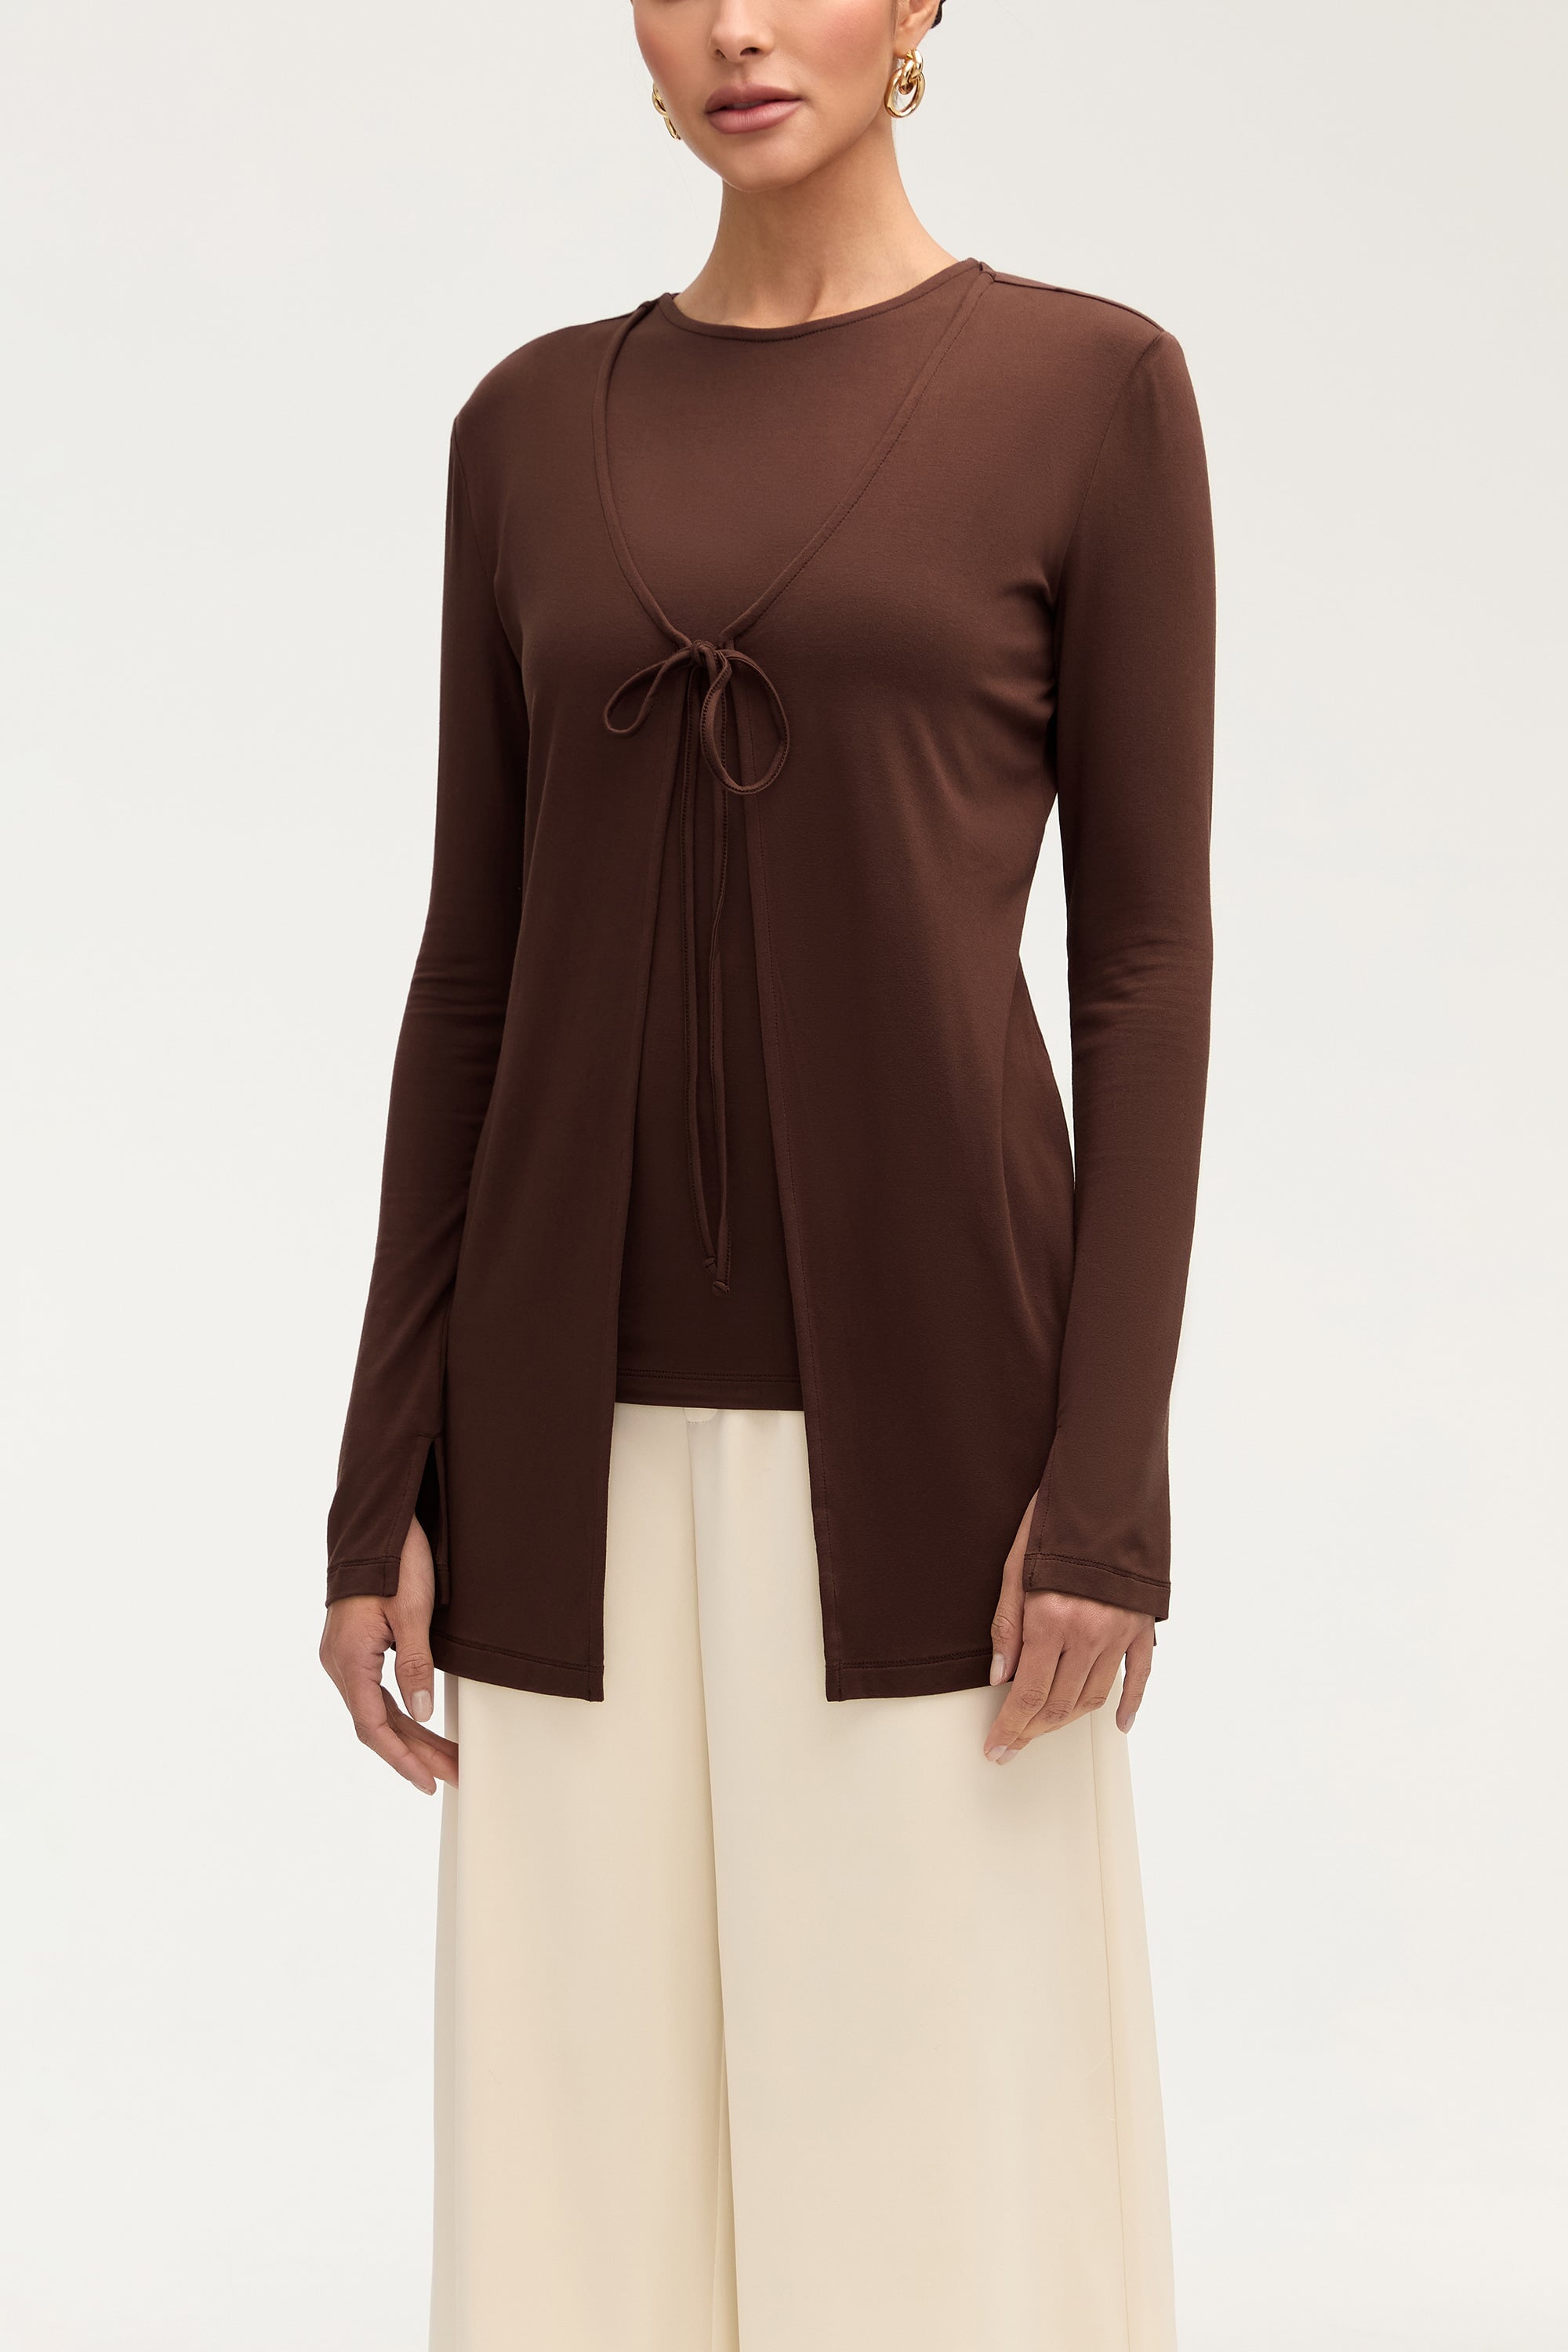 Labina Jersey Two Piece Tie Front Top - Brown Clothing Veiled 